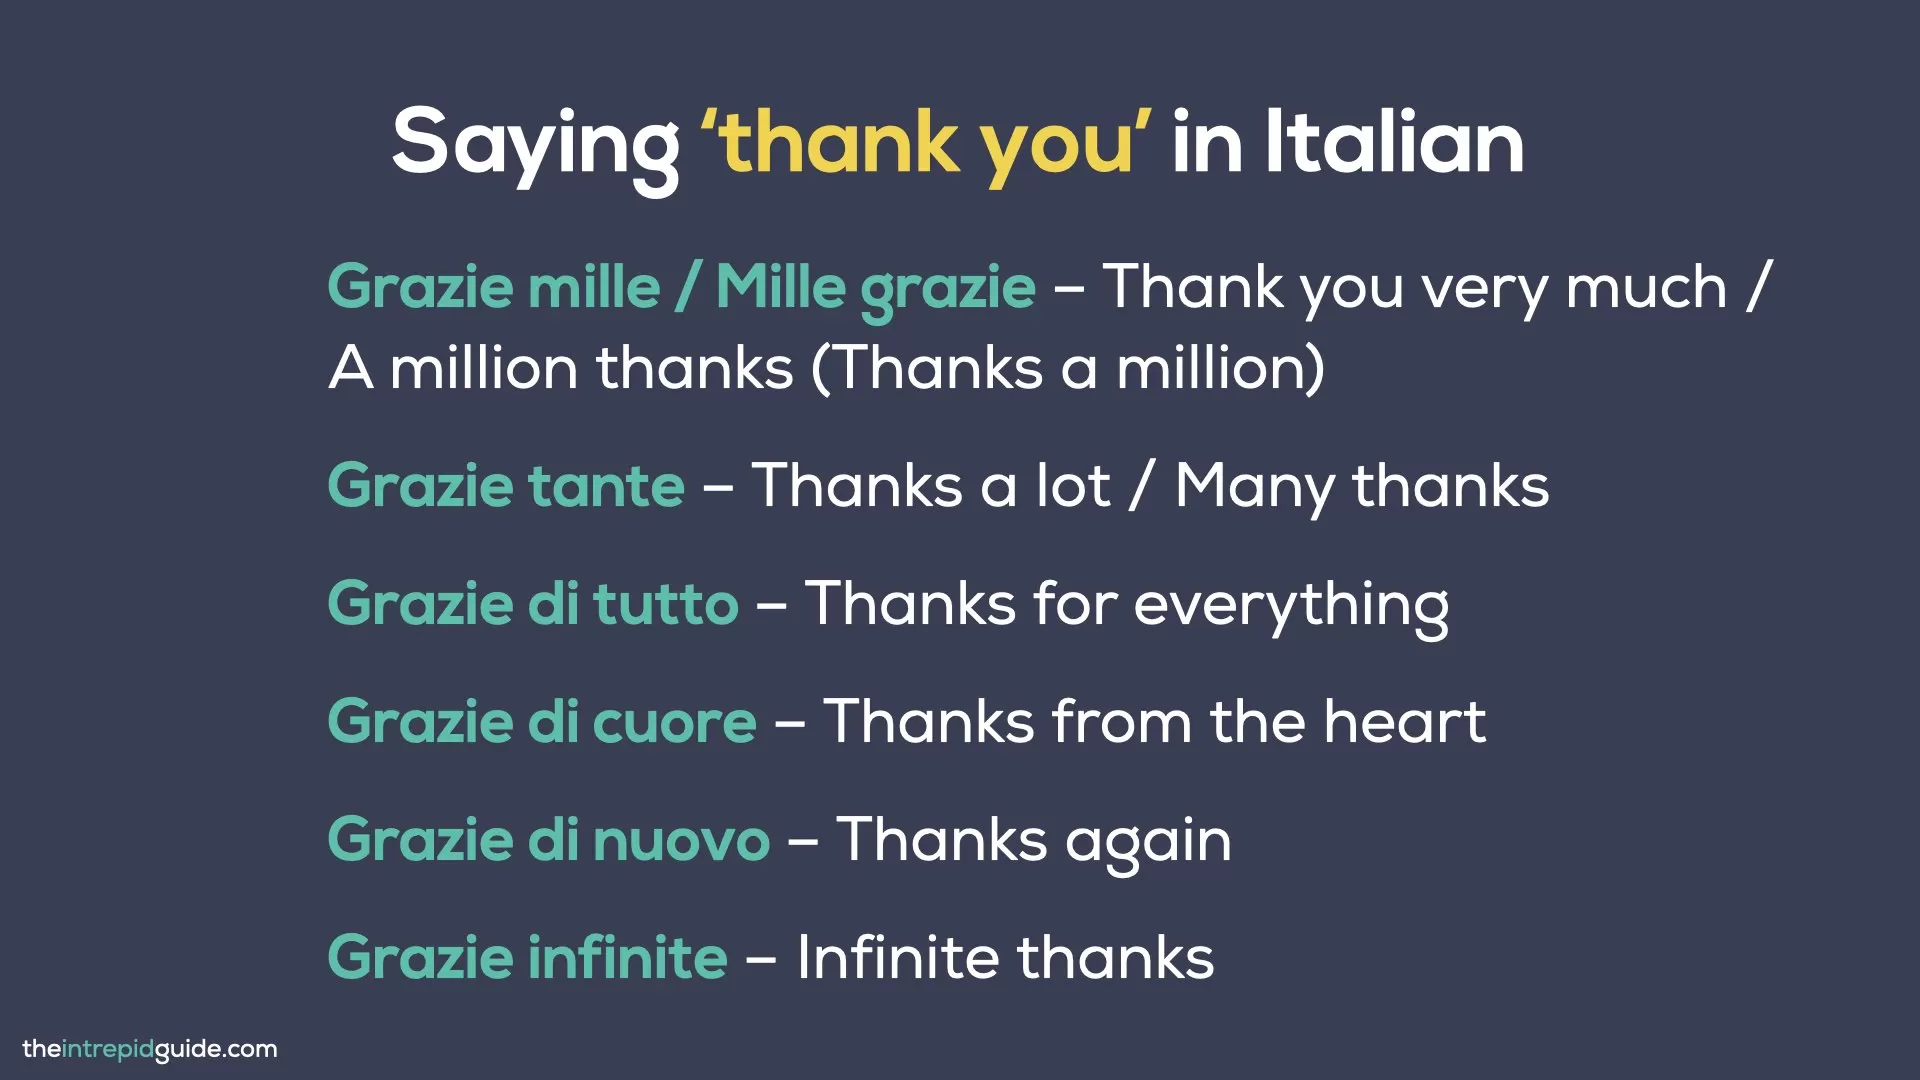 How to say Please in Italian - Ways to say thank you in Italian